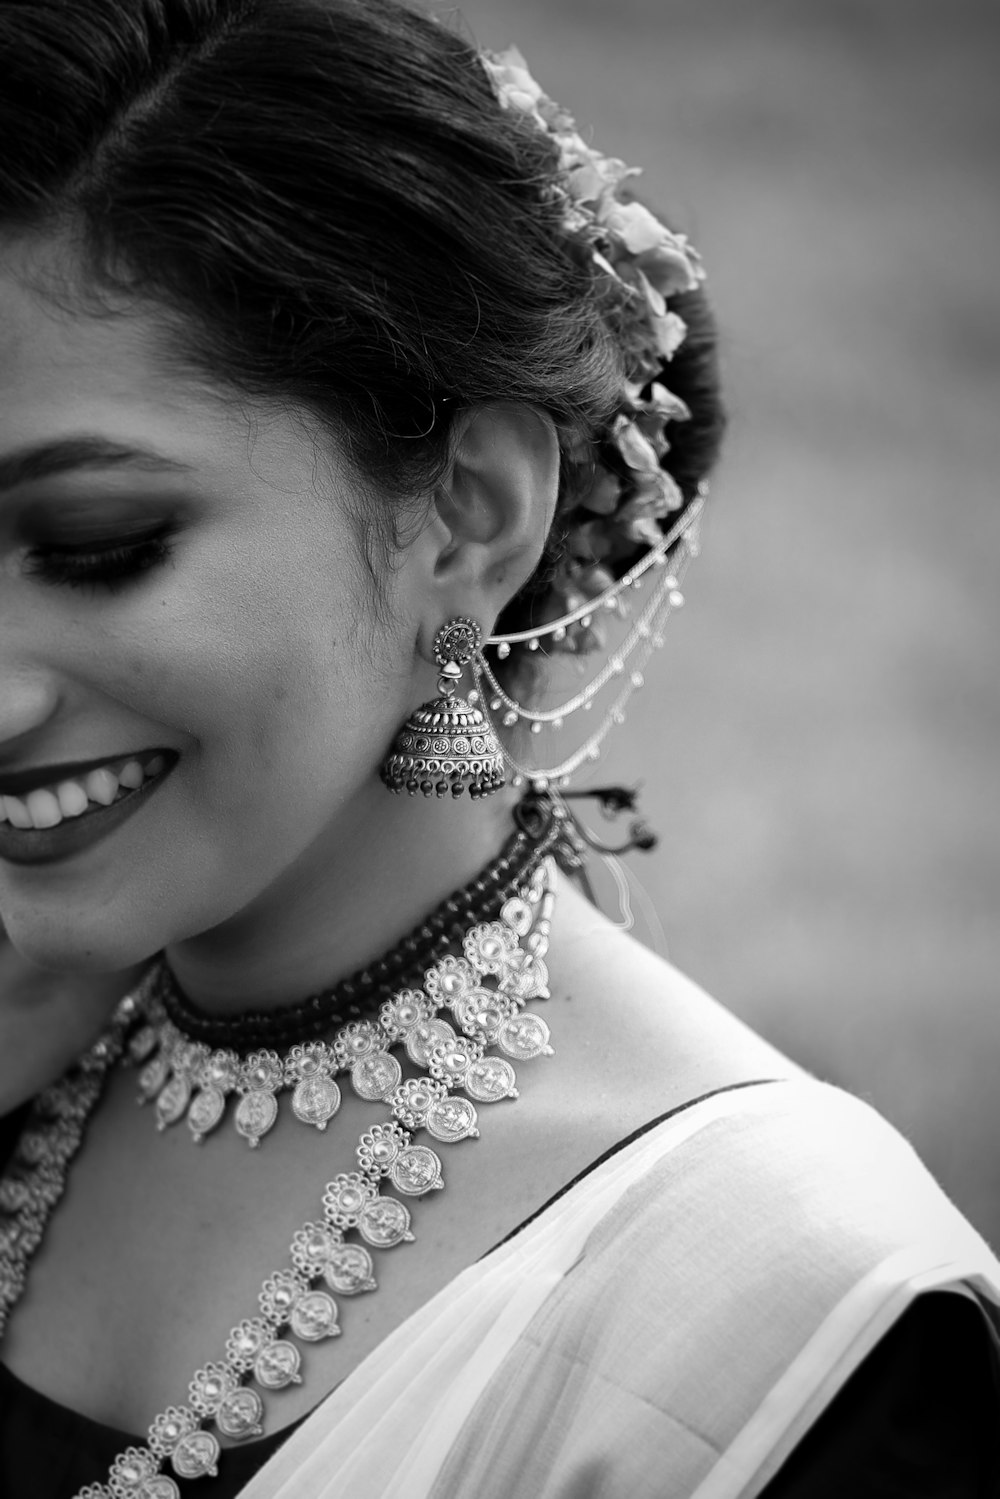 grayscale photo of smiling woman wearing silver necklace